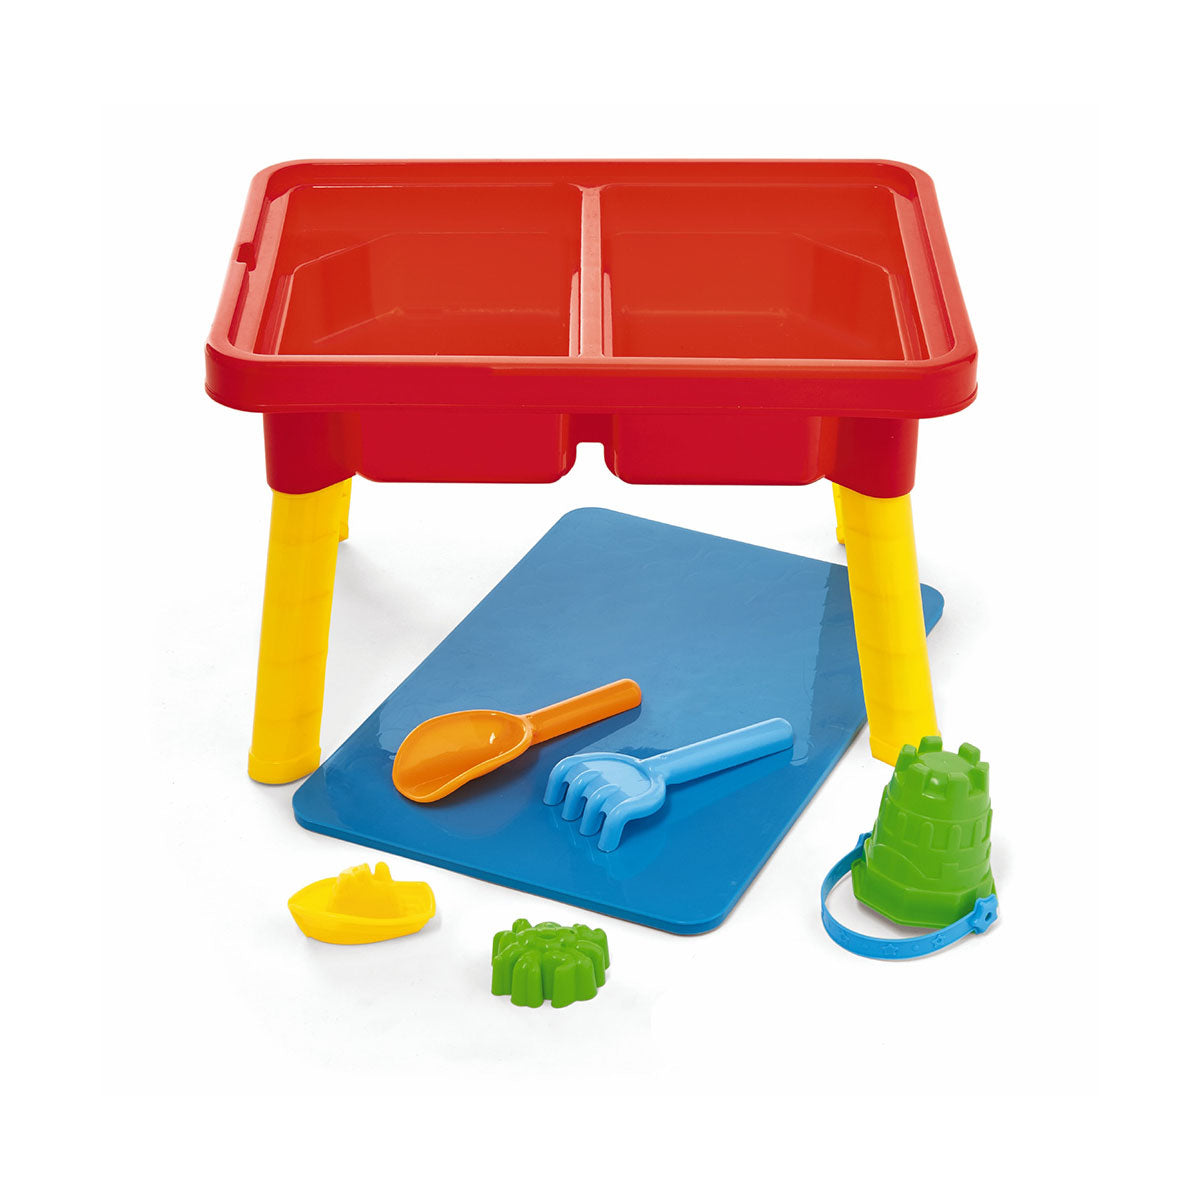 Sand n’ Splash Activity Table from Kidoozie